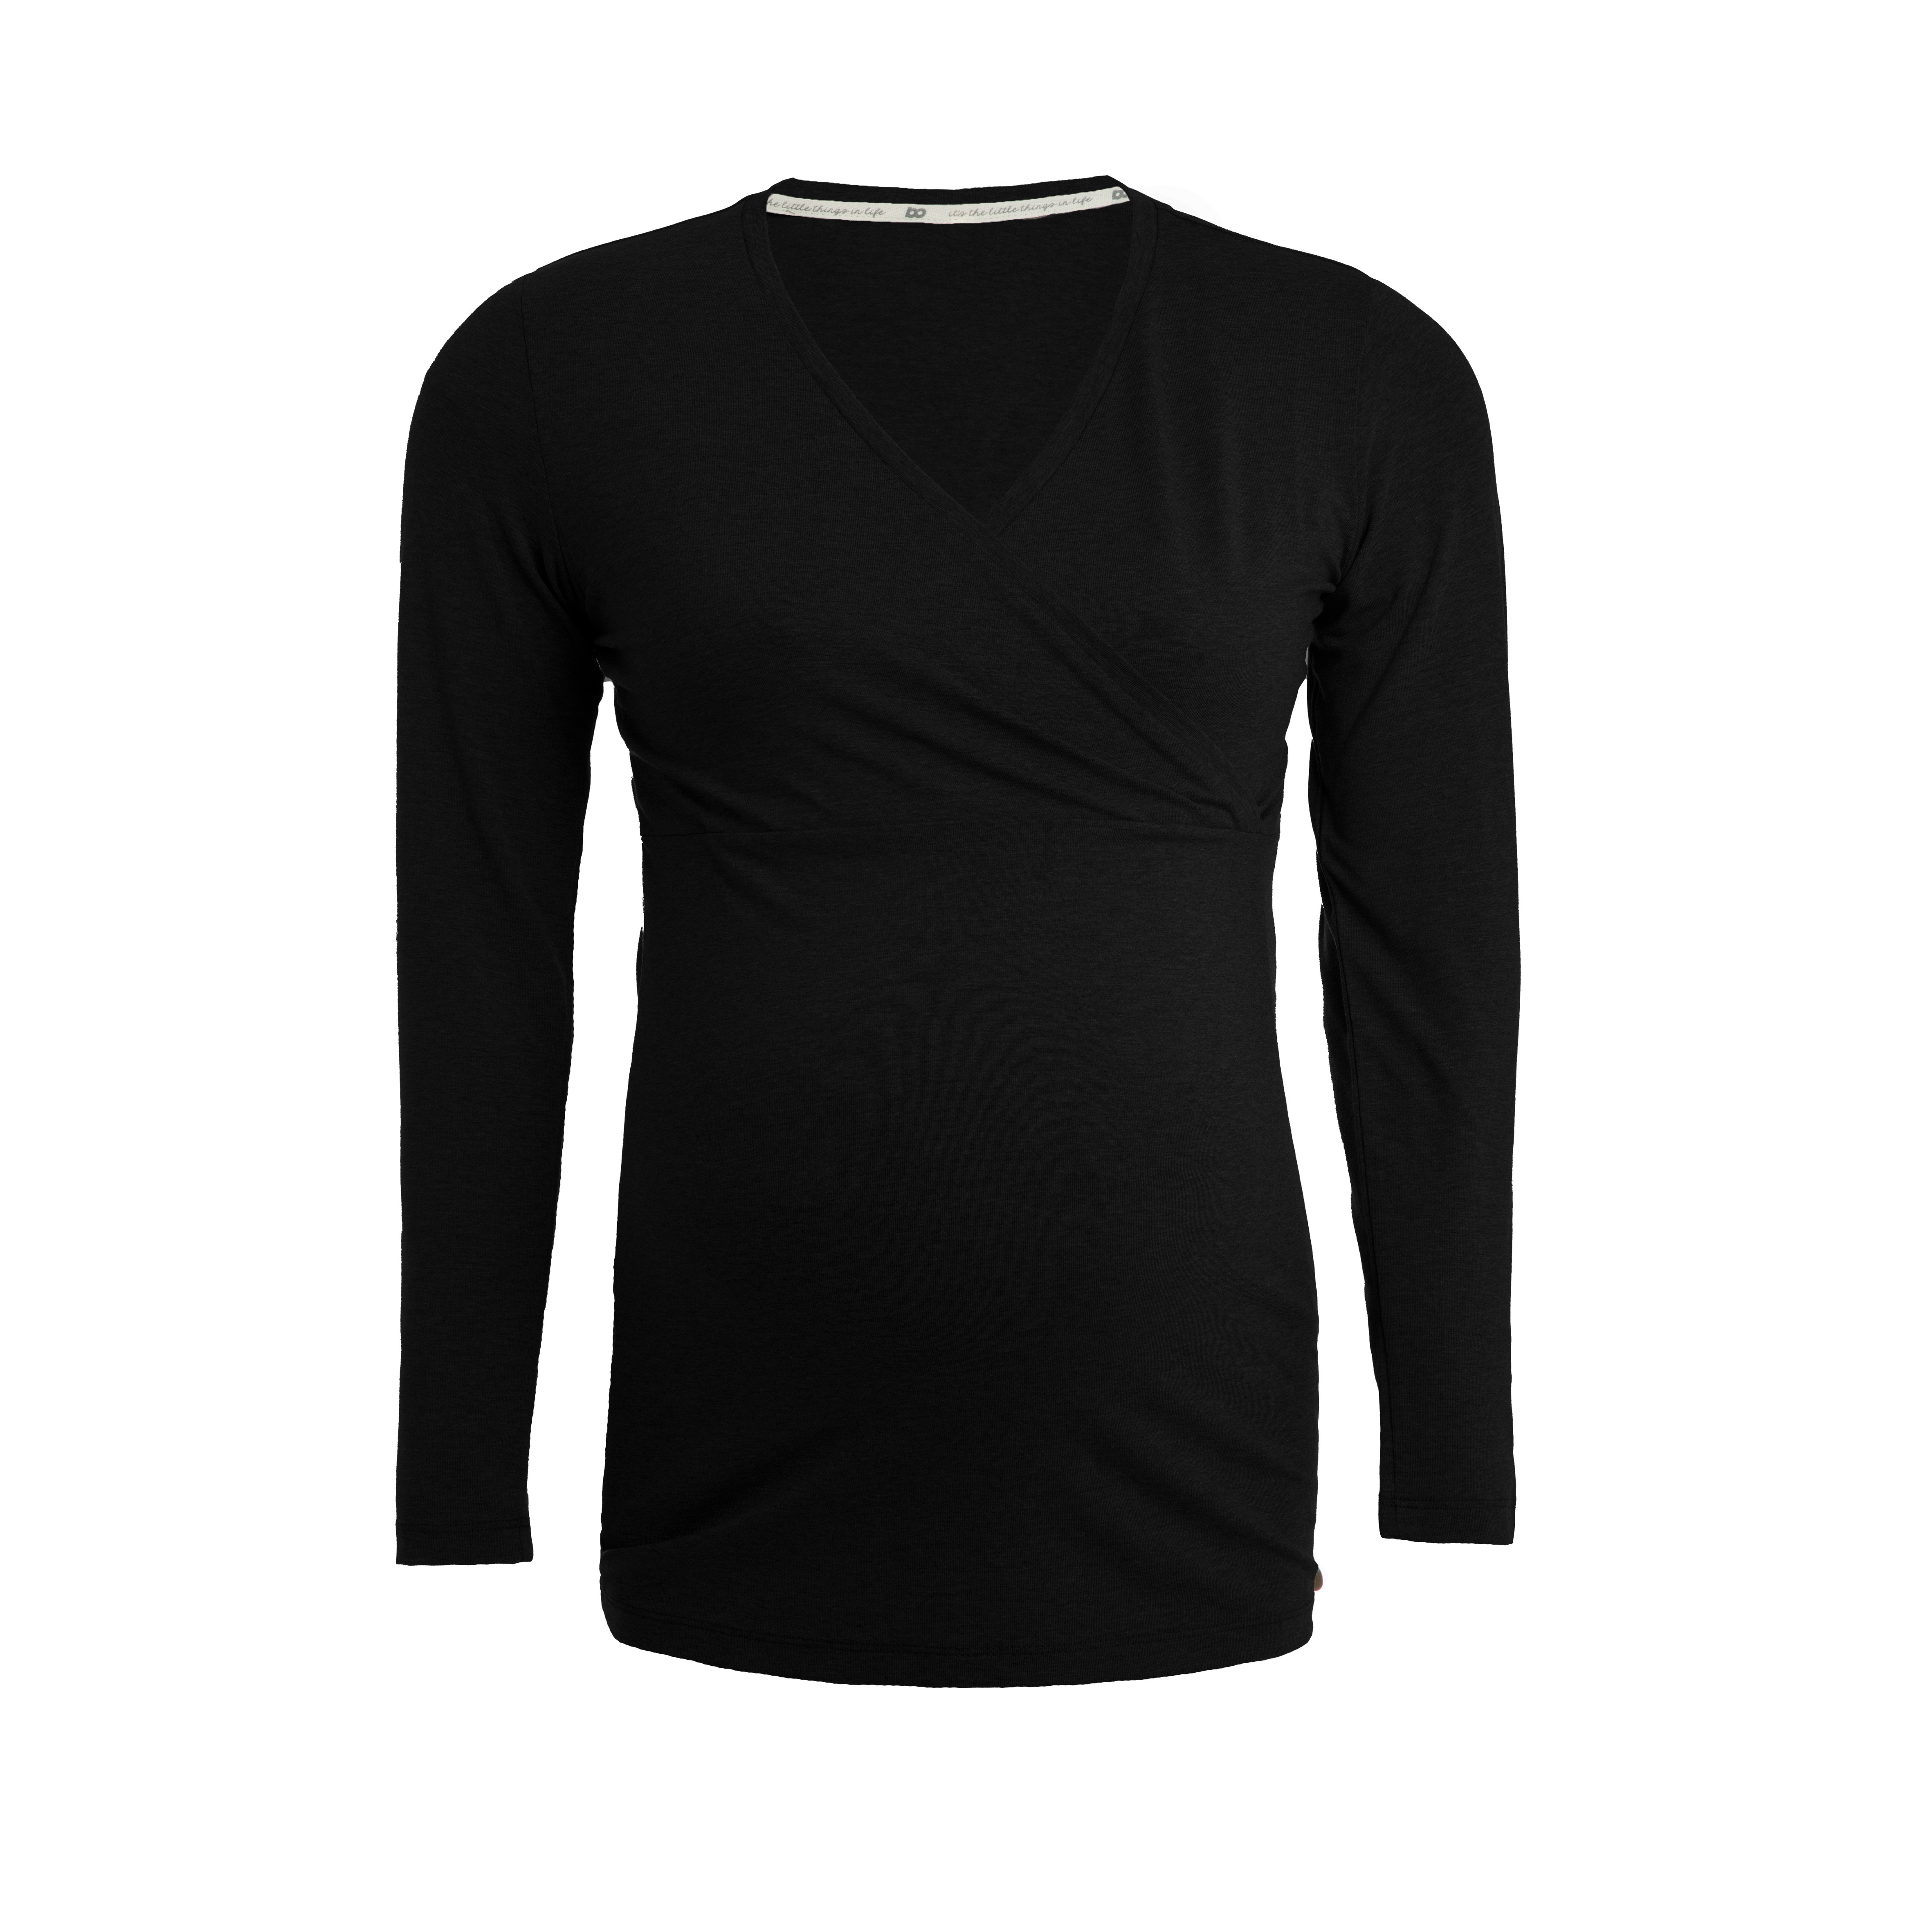 Maternity long sleeve top Glow black - S - With nursing function